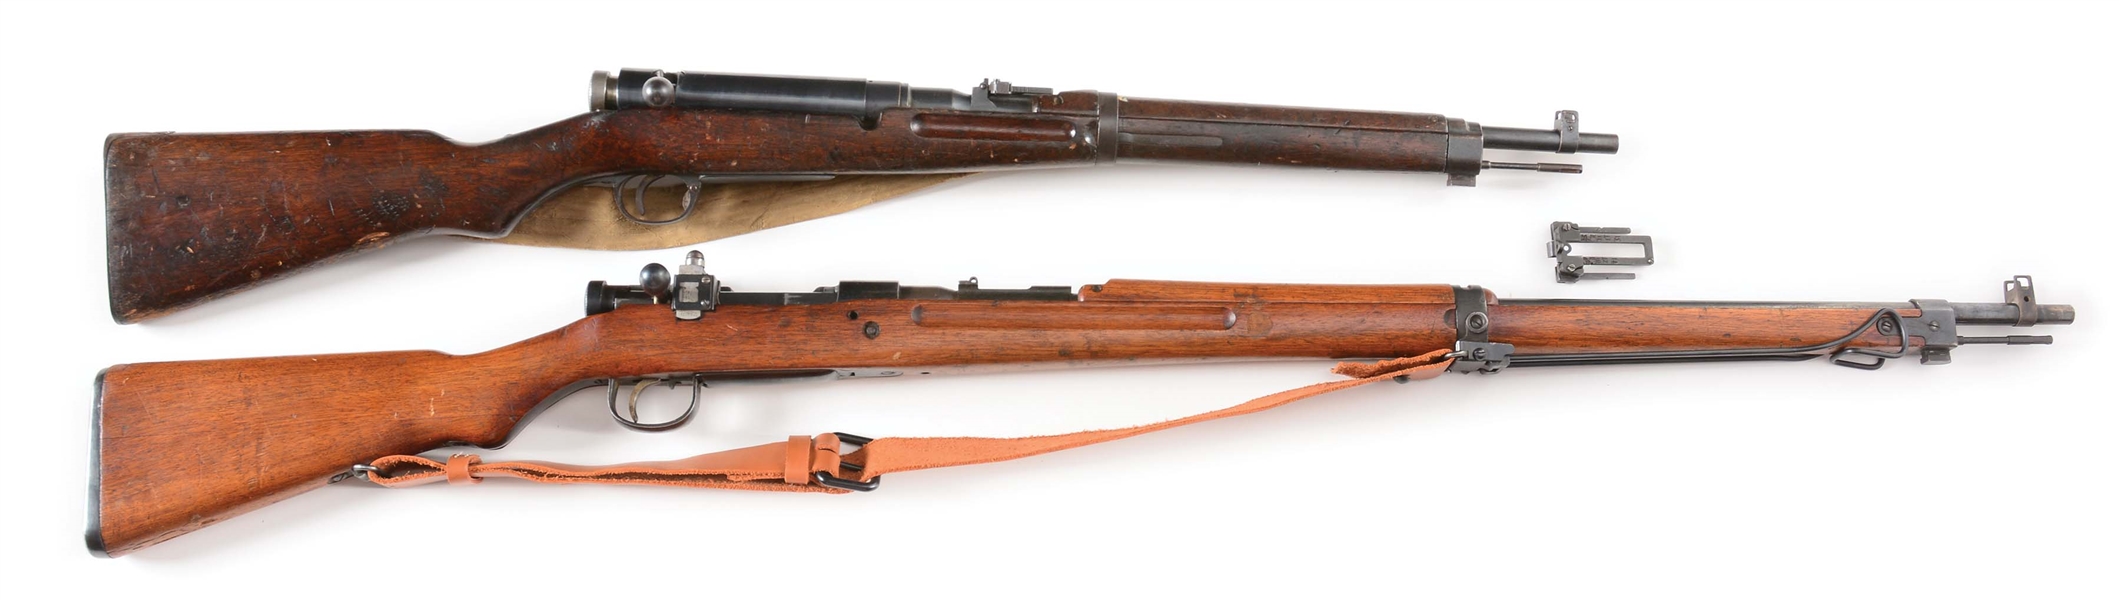 (C) LOT OF 2: JAPANESE TYPE 38 & TYPE 99 BOLT ACTION CARBINE AND RIFLE.